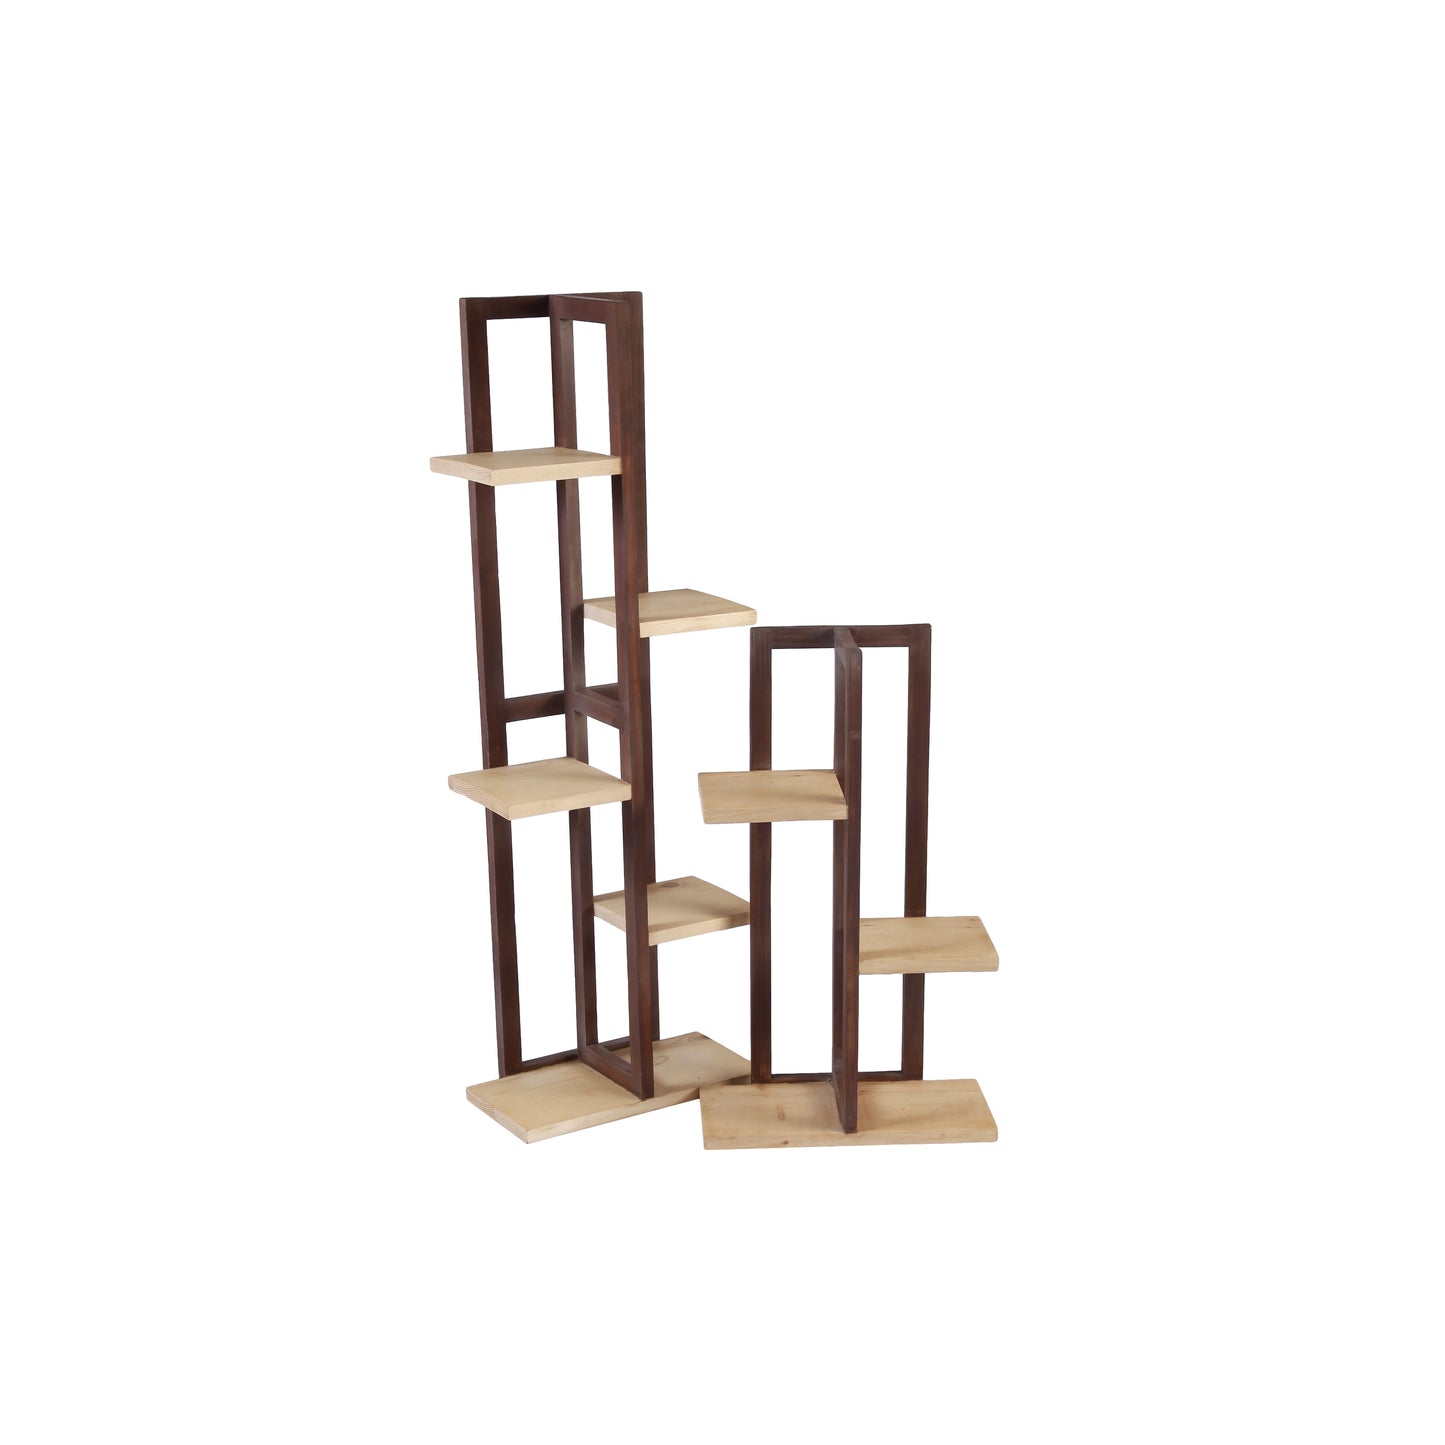 A Tiny Mistake All Purpose Three Tier Stand (One Piece) (For Planters, Ornaments and Accessories) (Dark Stand with Natural Pine Wood Planks)